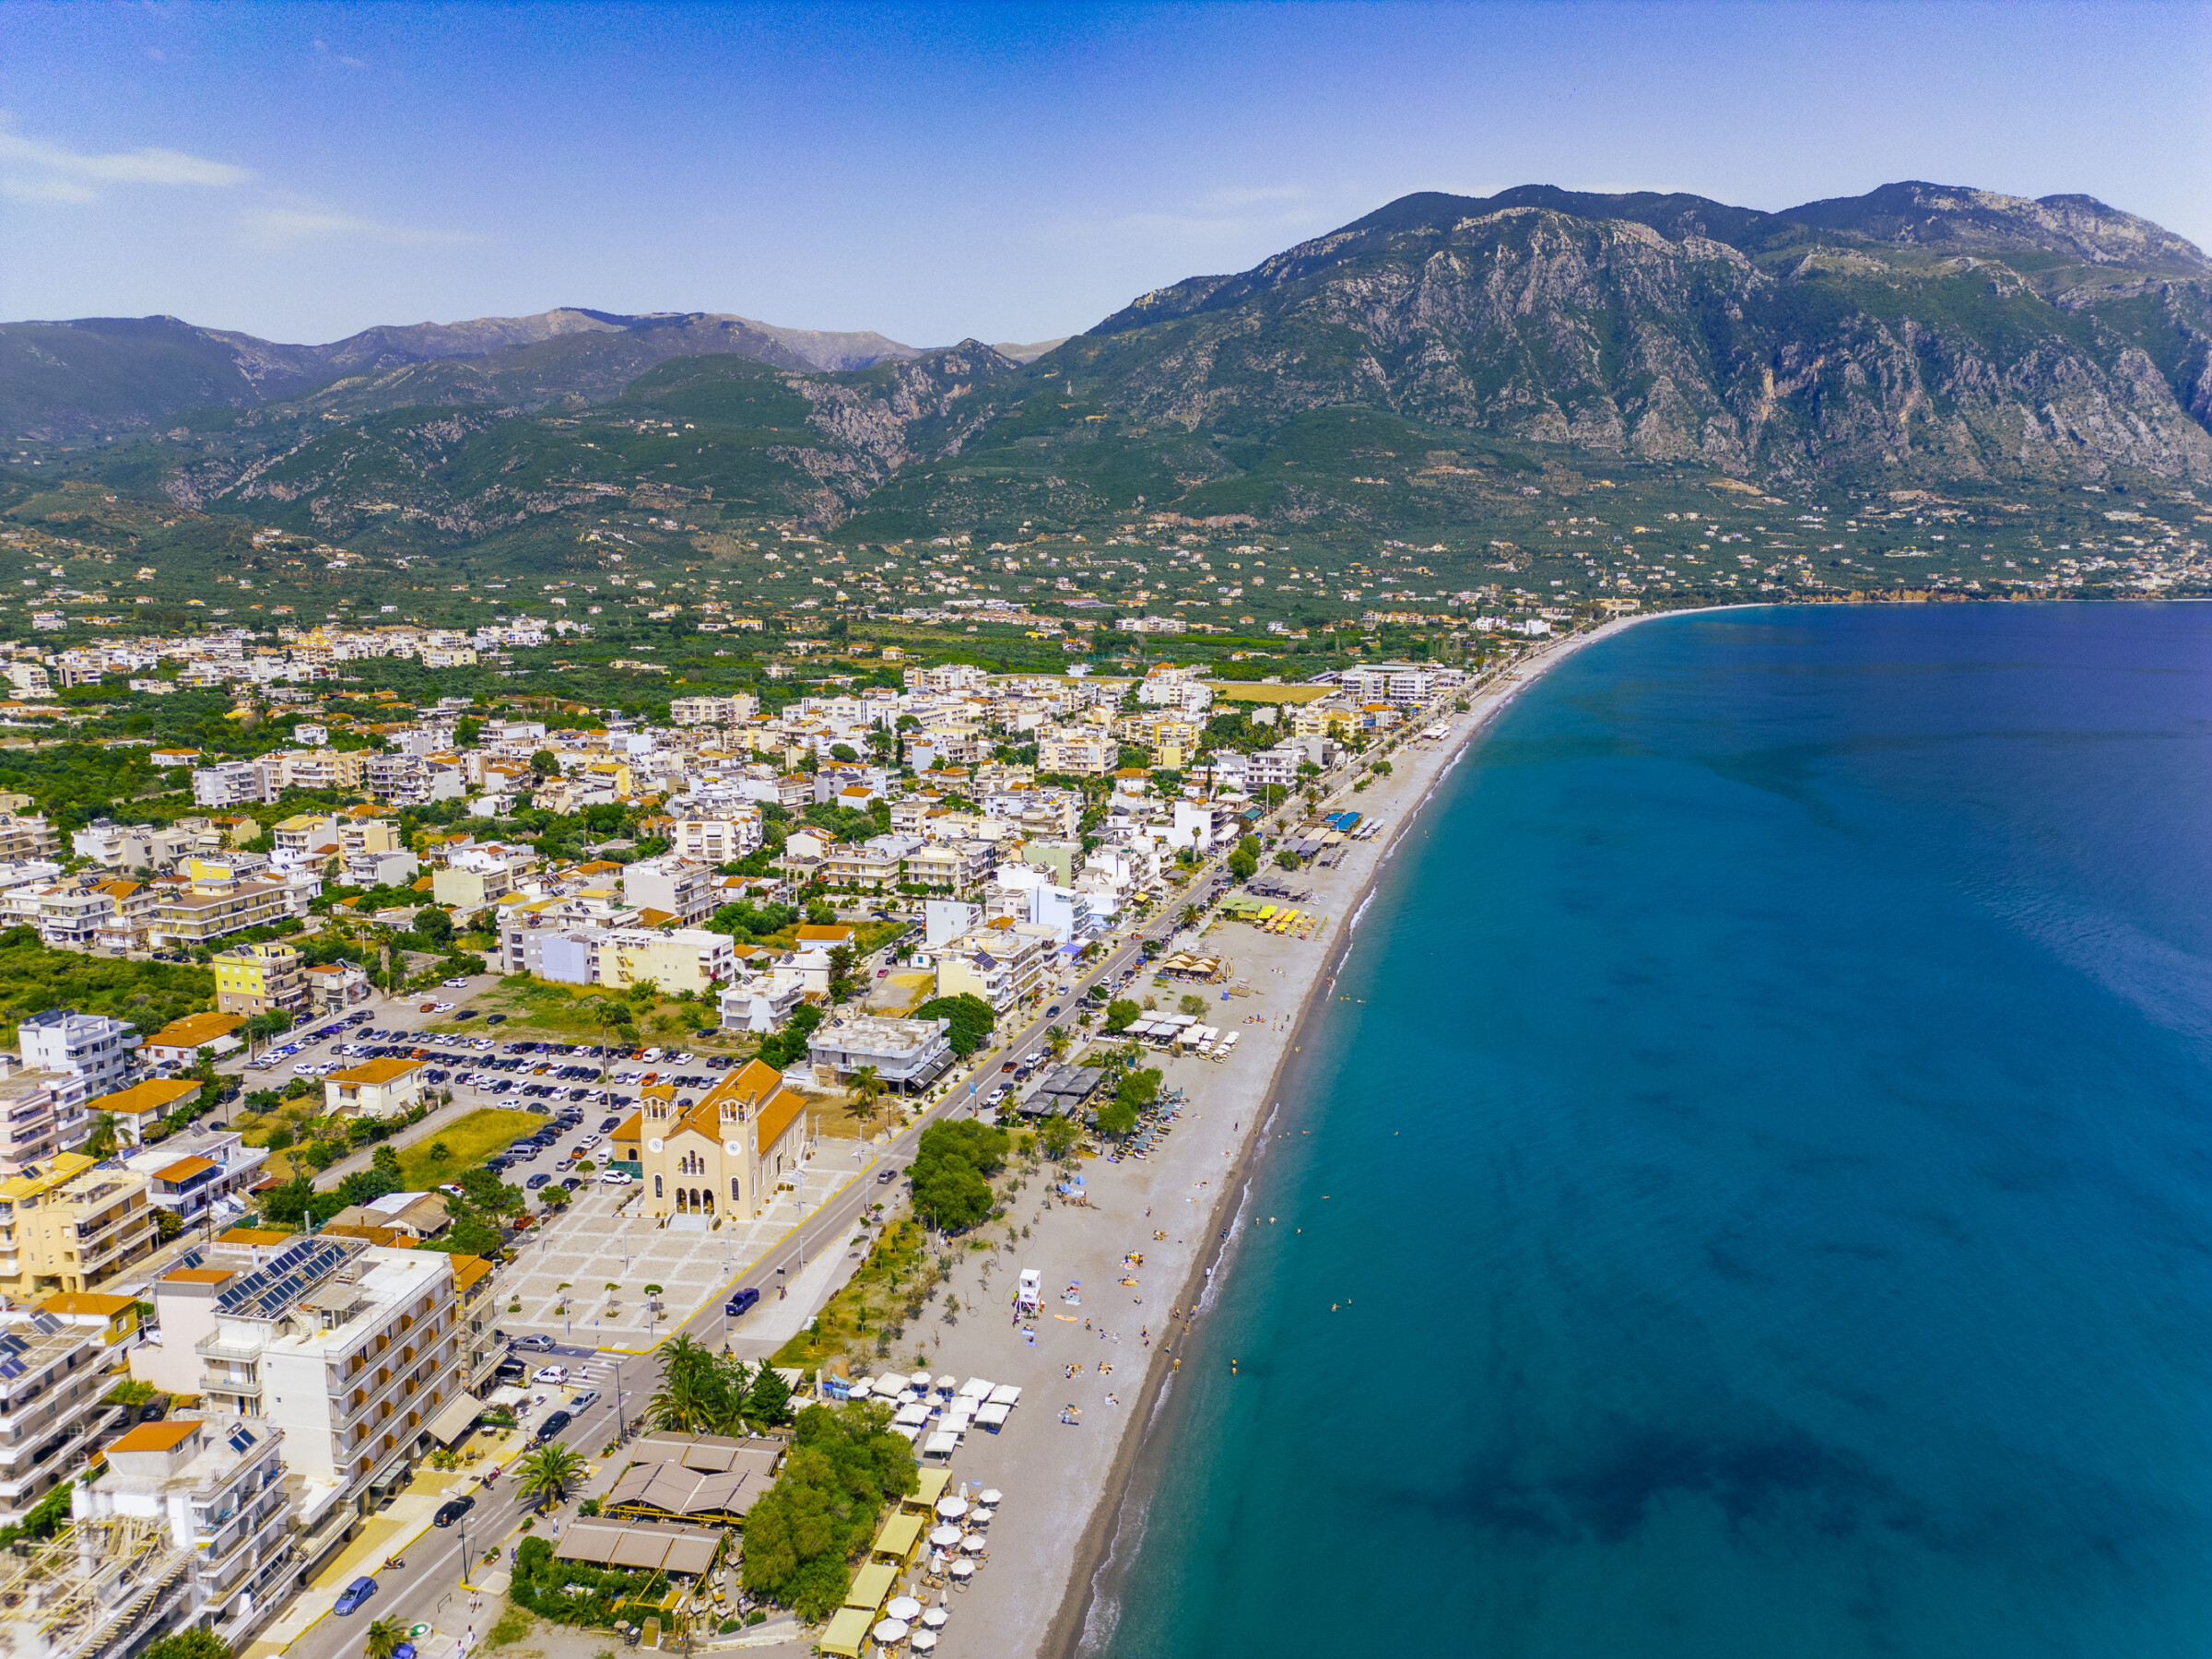 This is an aerial view of Kalamata with Taygetus Mountain in the background. 